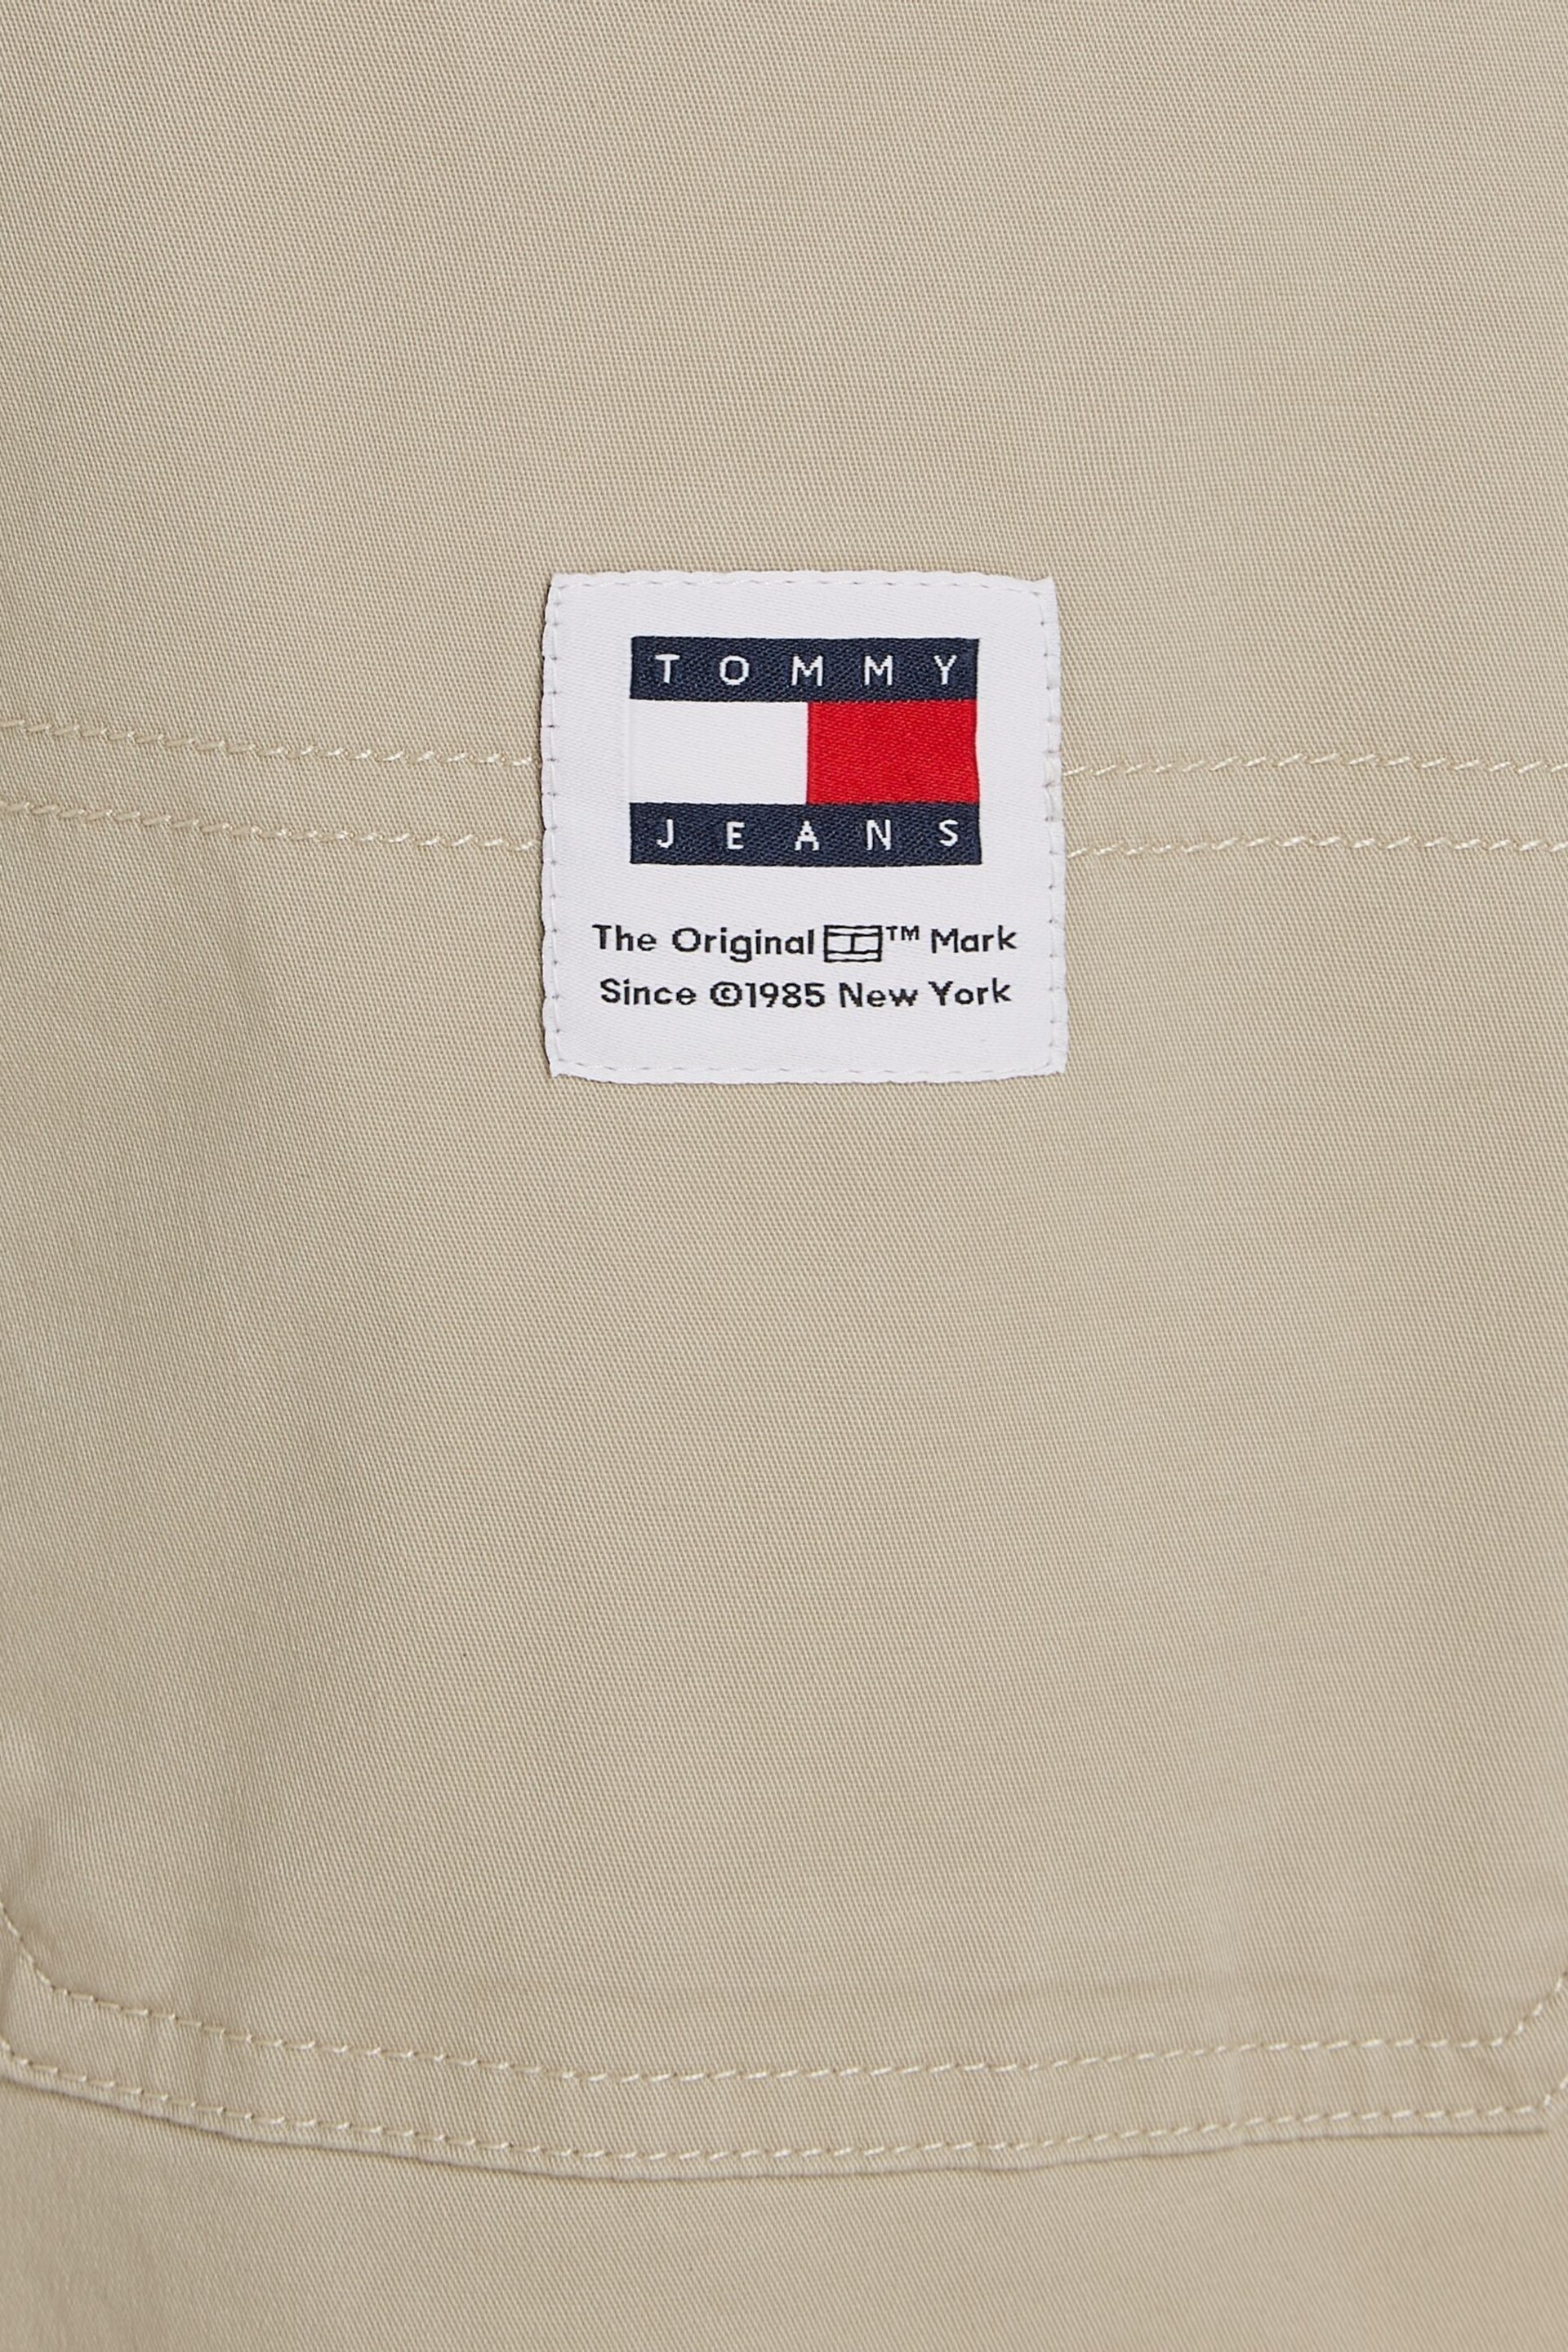 Tommy Jeans Cream Aiden Tapered Trousers - Image 6 of 6